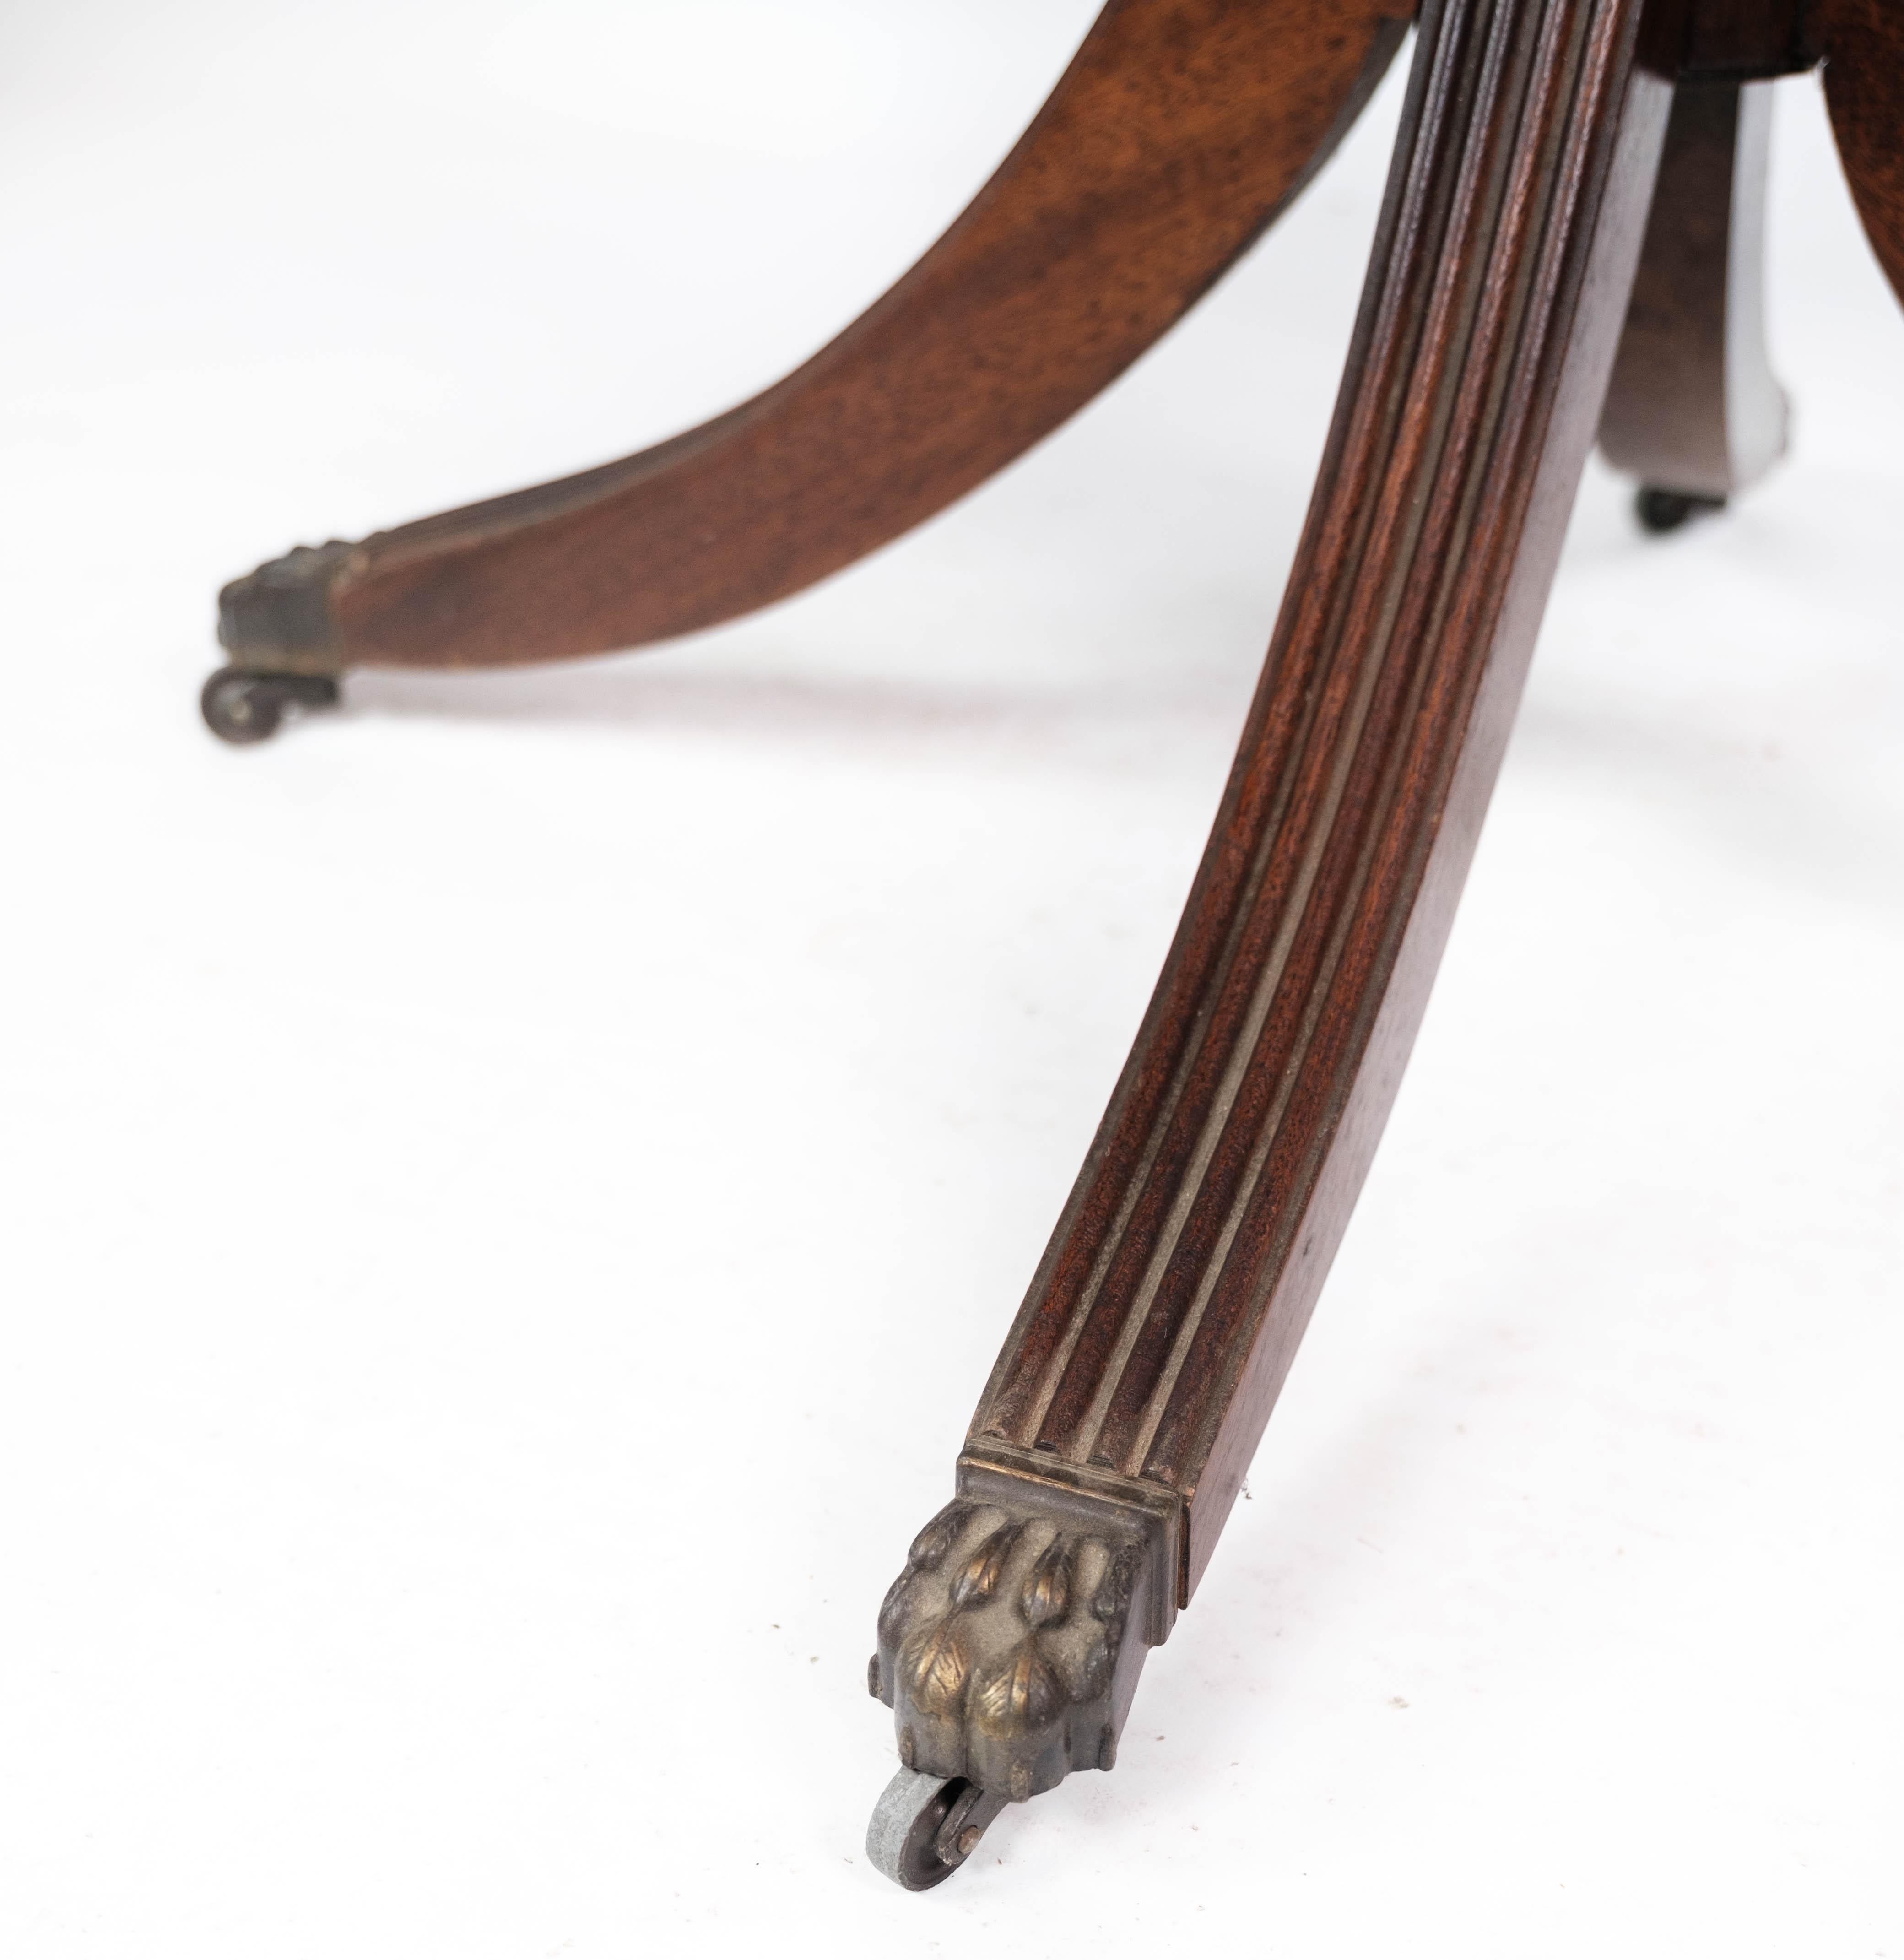 Other Antique Dining Table in Mahogany with Inlaid Wood and Leather, 1920s For Sale